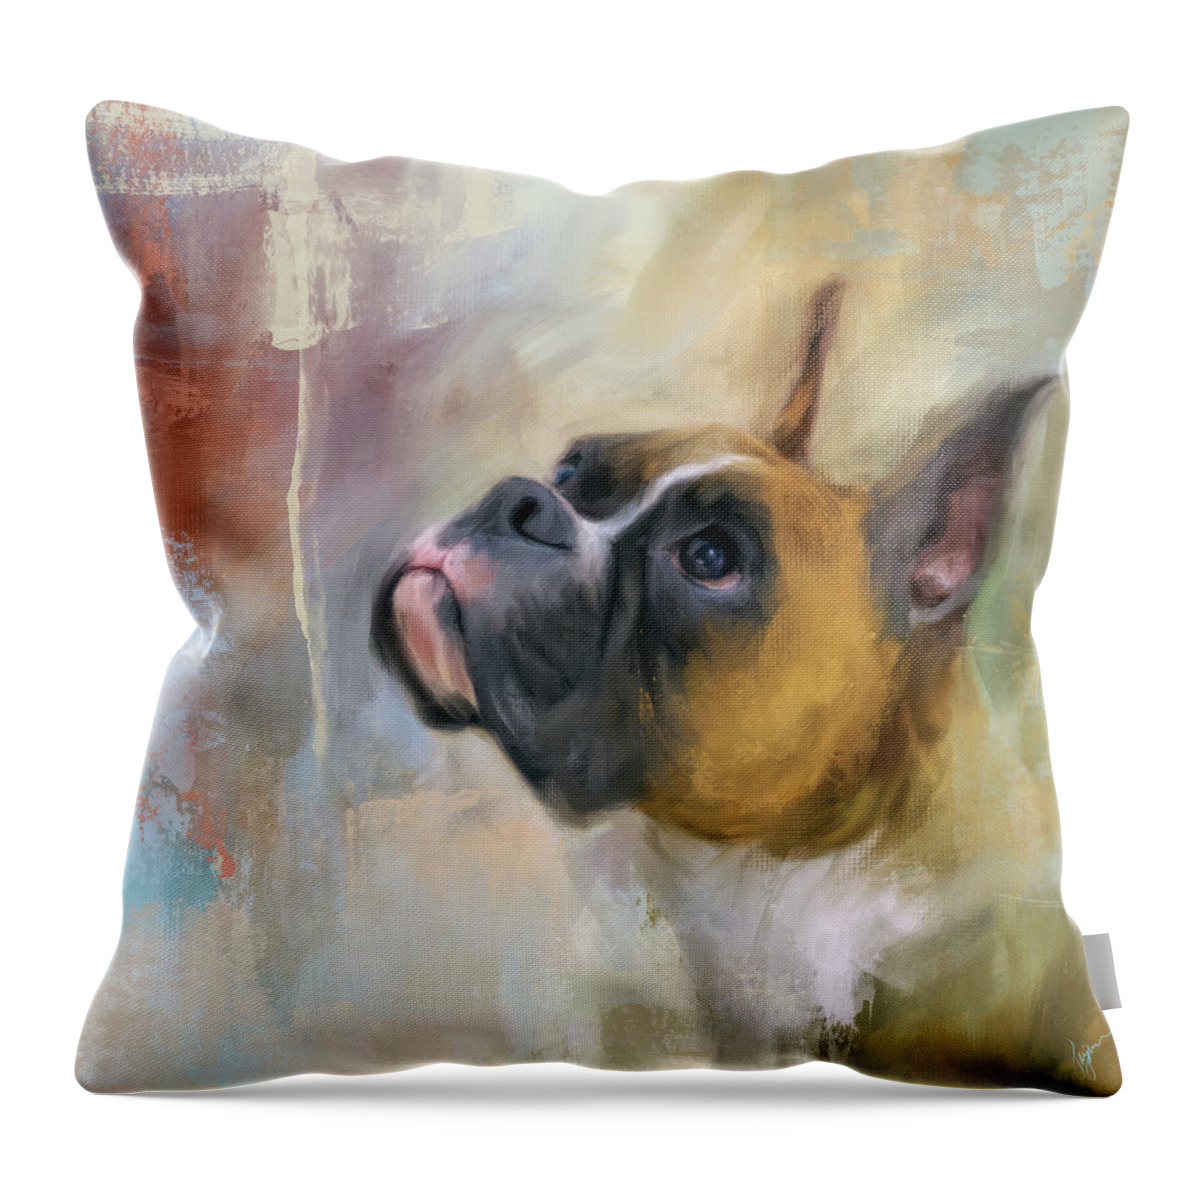 Colorful Throw Pillow featuring the painting Flashy Fawn Boxer by Jai Johnson